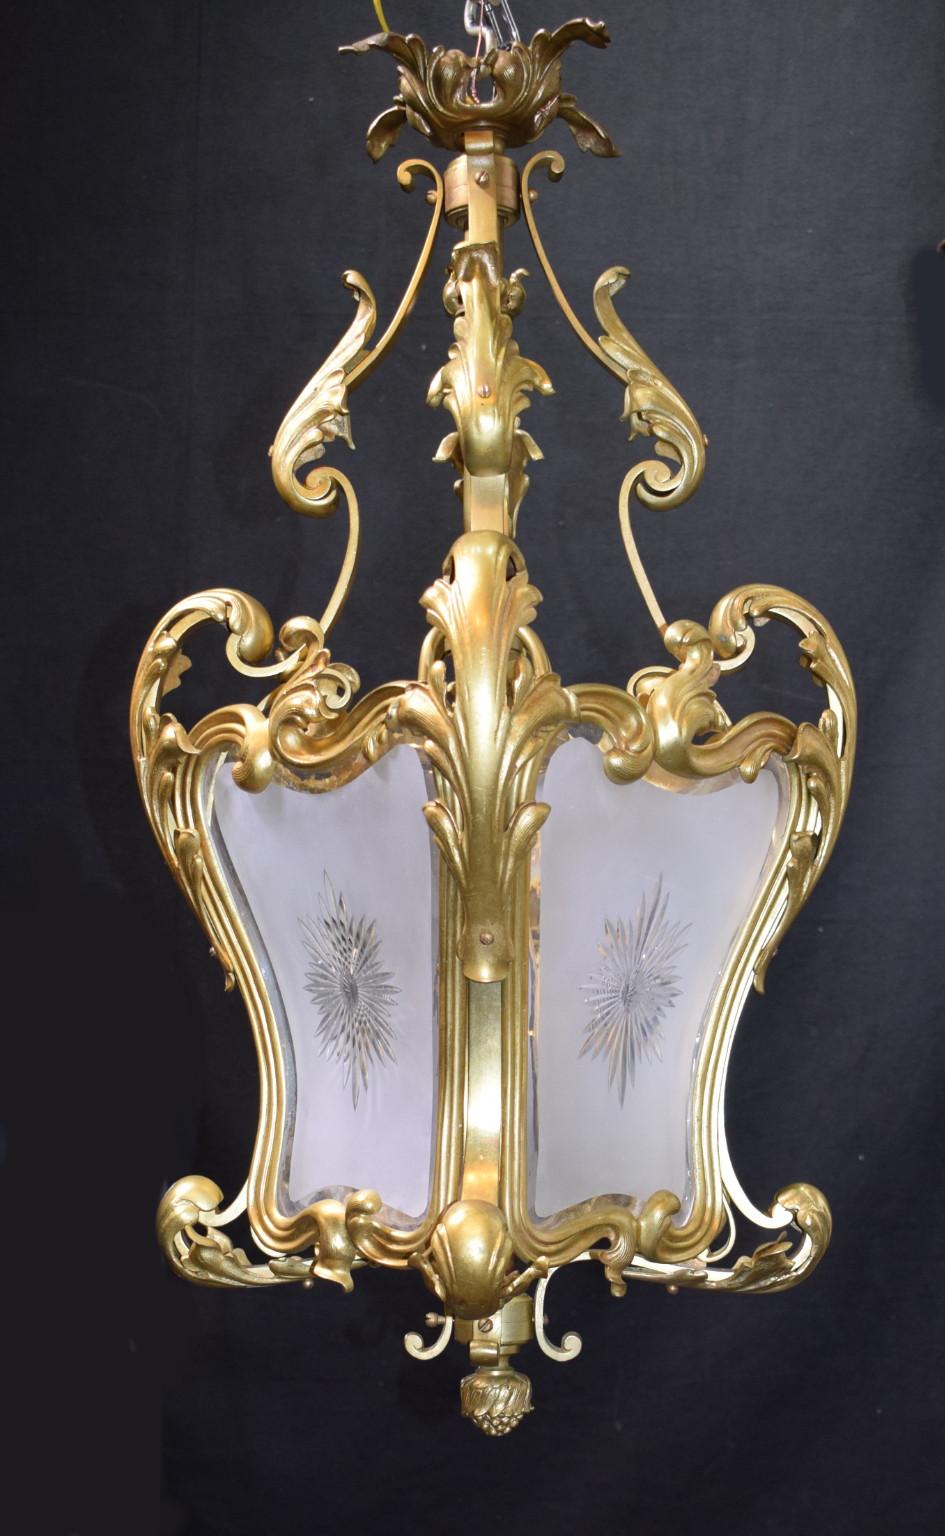 Antique gilt bronze lantern featuring double curved, beveled and handcut crystal panels.
Louis XV style. France, circa 1910.
CW4471